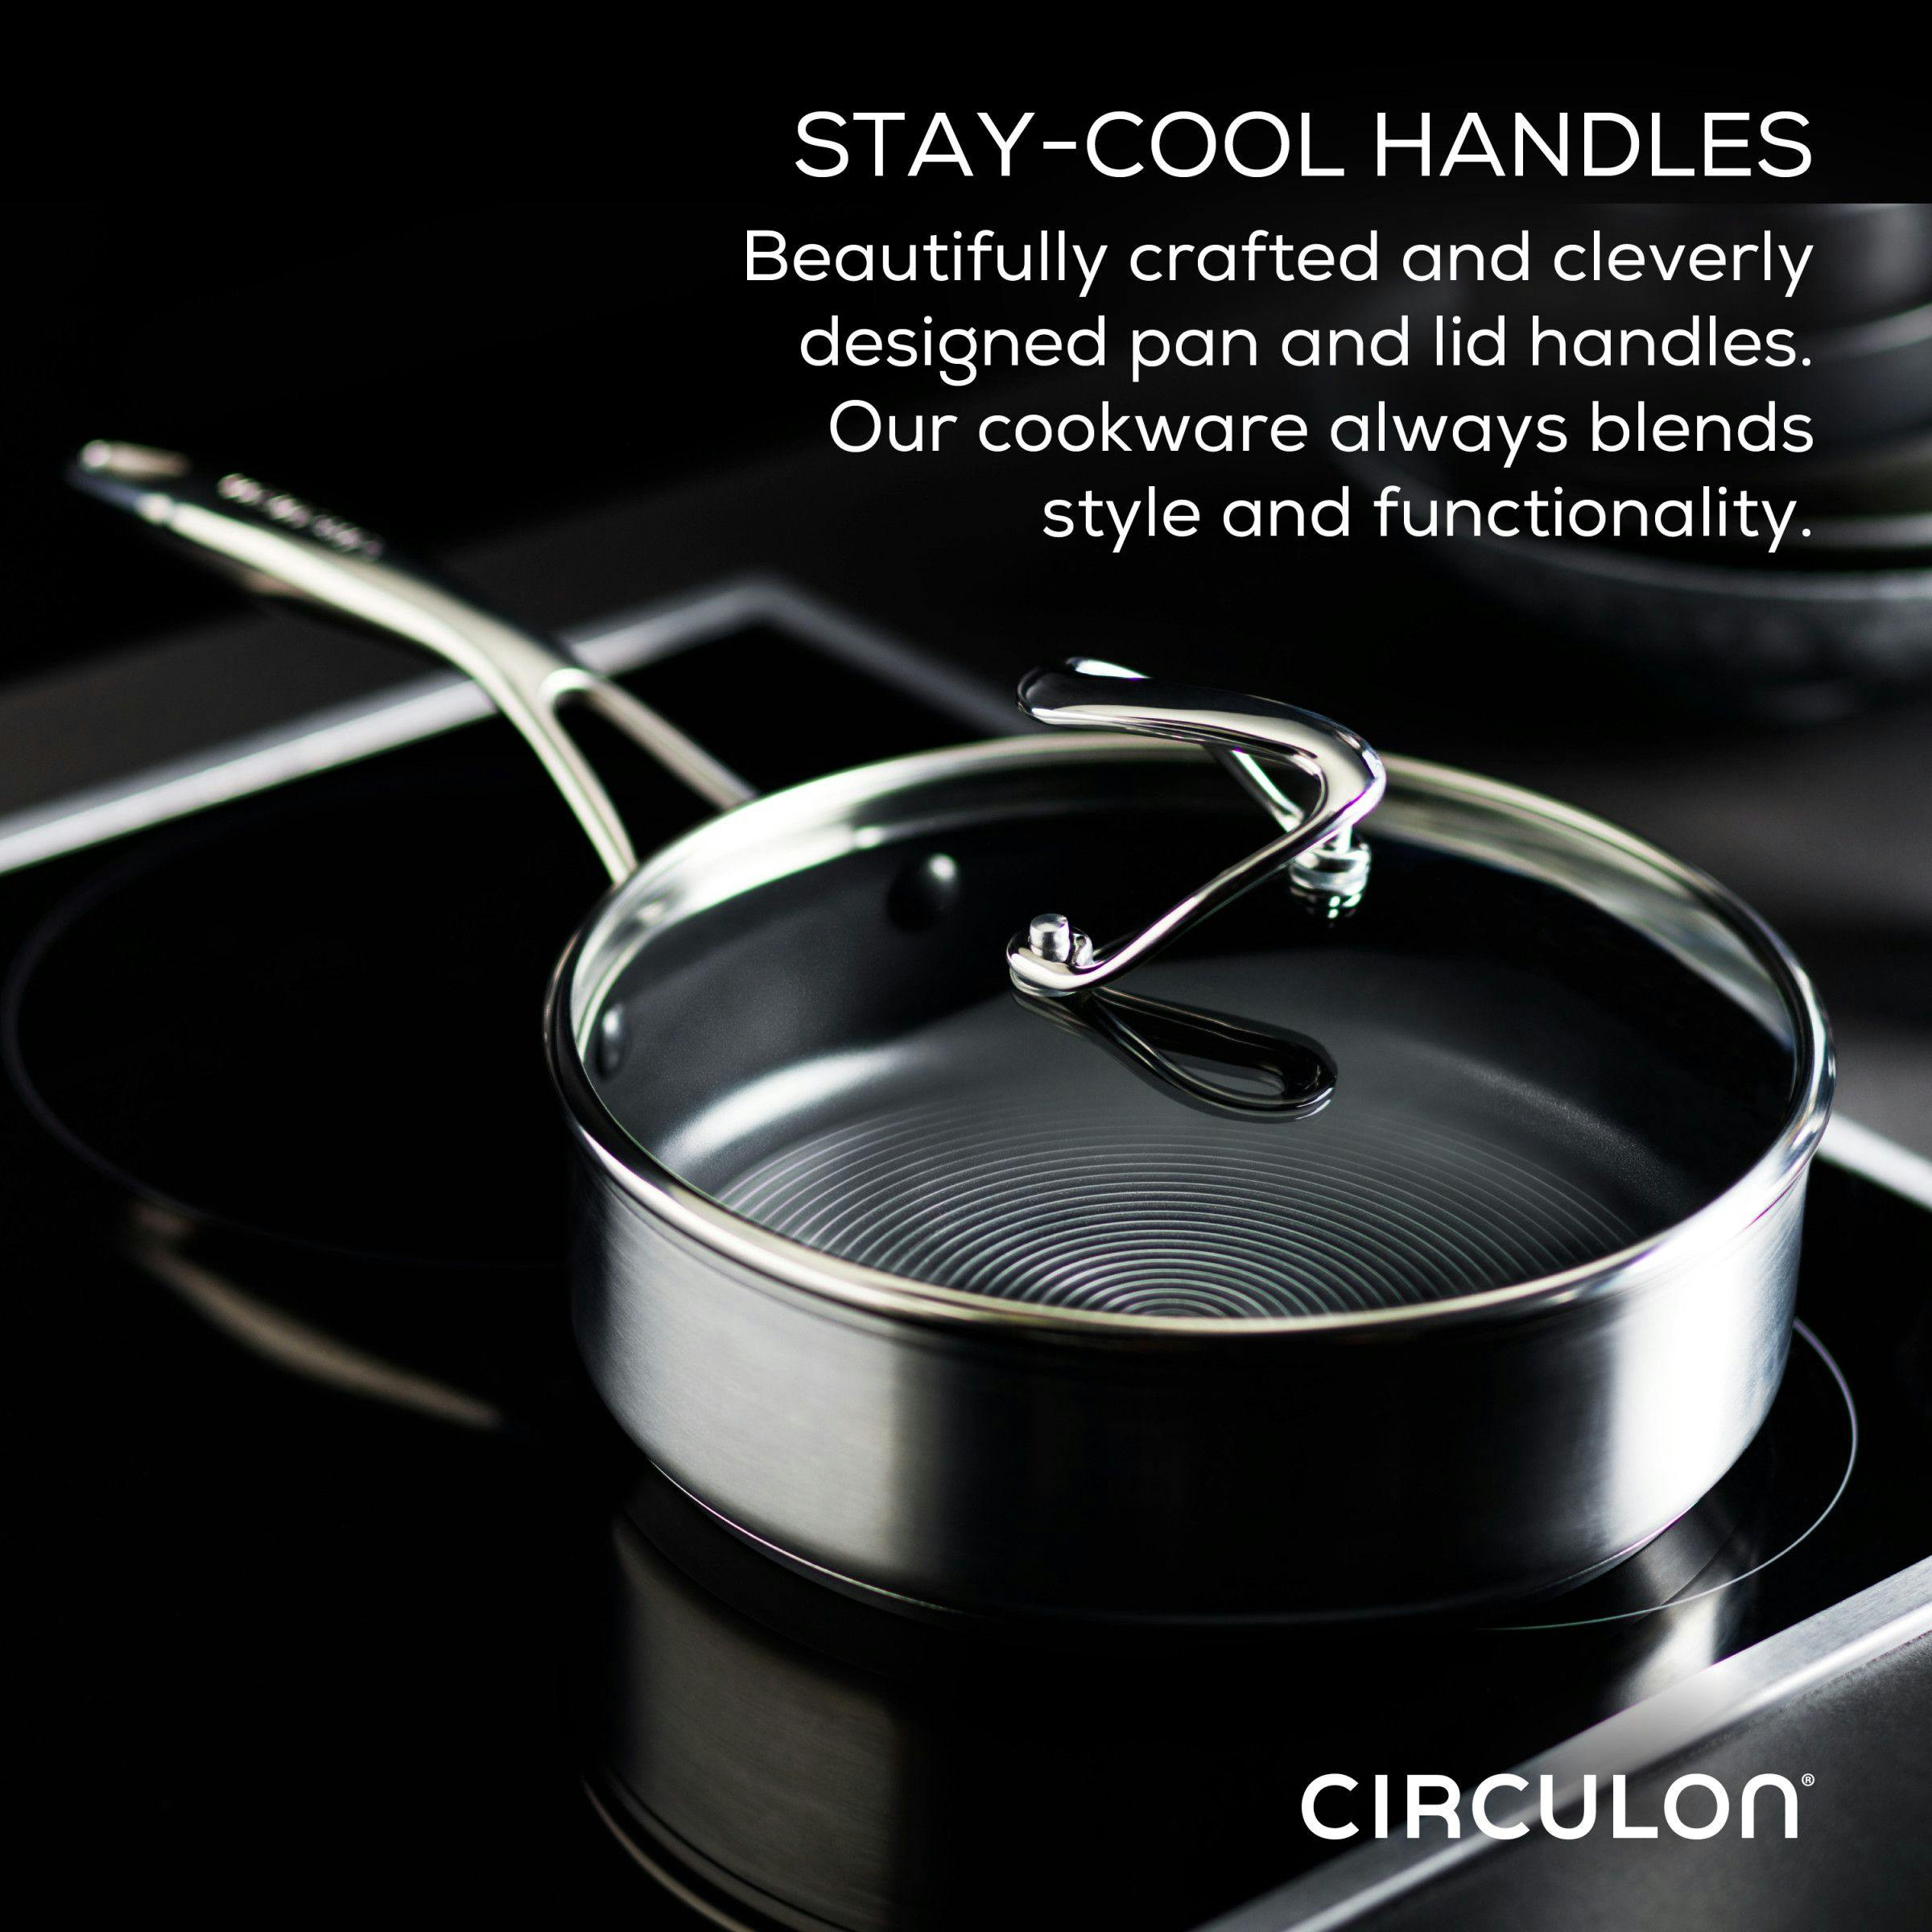 Circulon Stainless Steel Induction Cookware Set with SteelShield Hybrid Stainless and Nonstick Technology, 11-piece, Silver